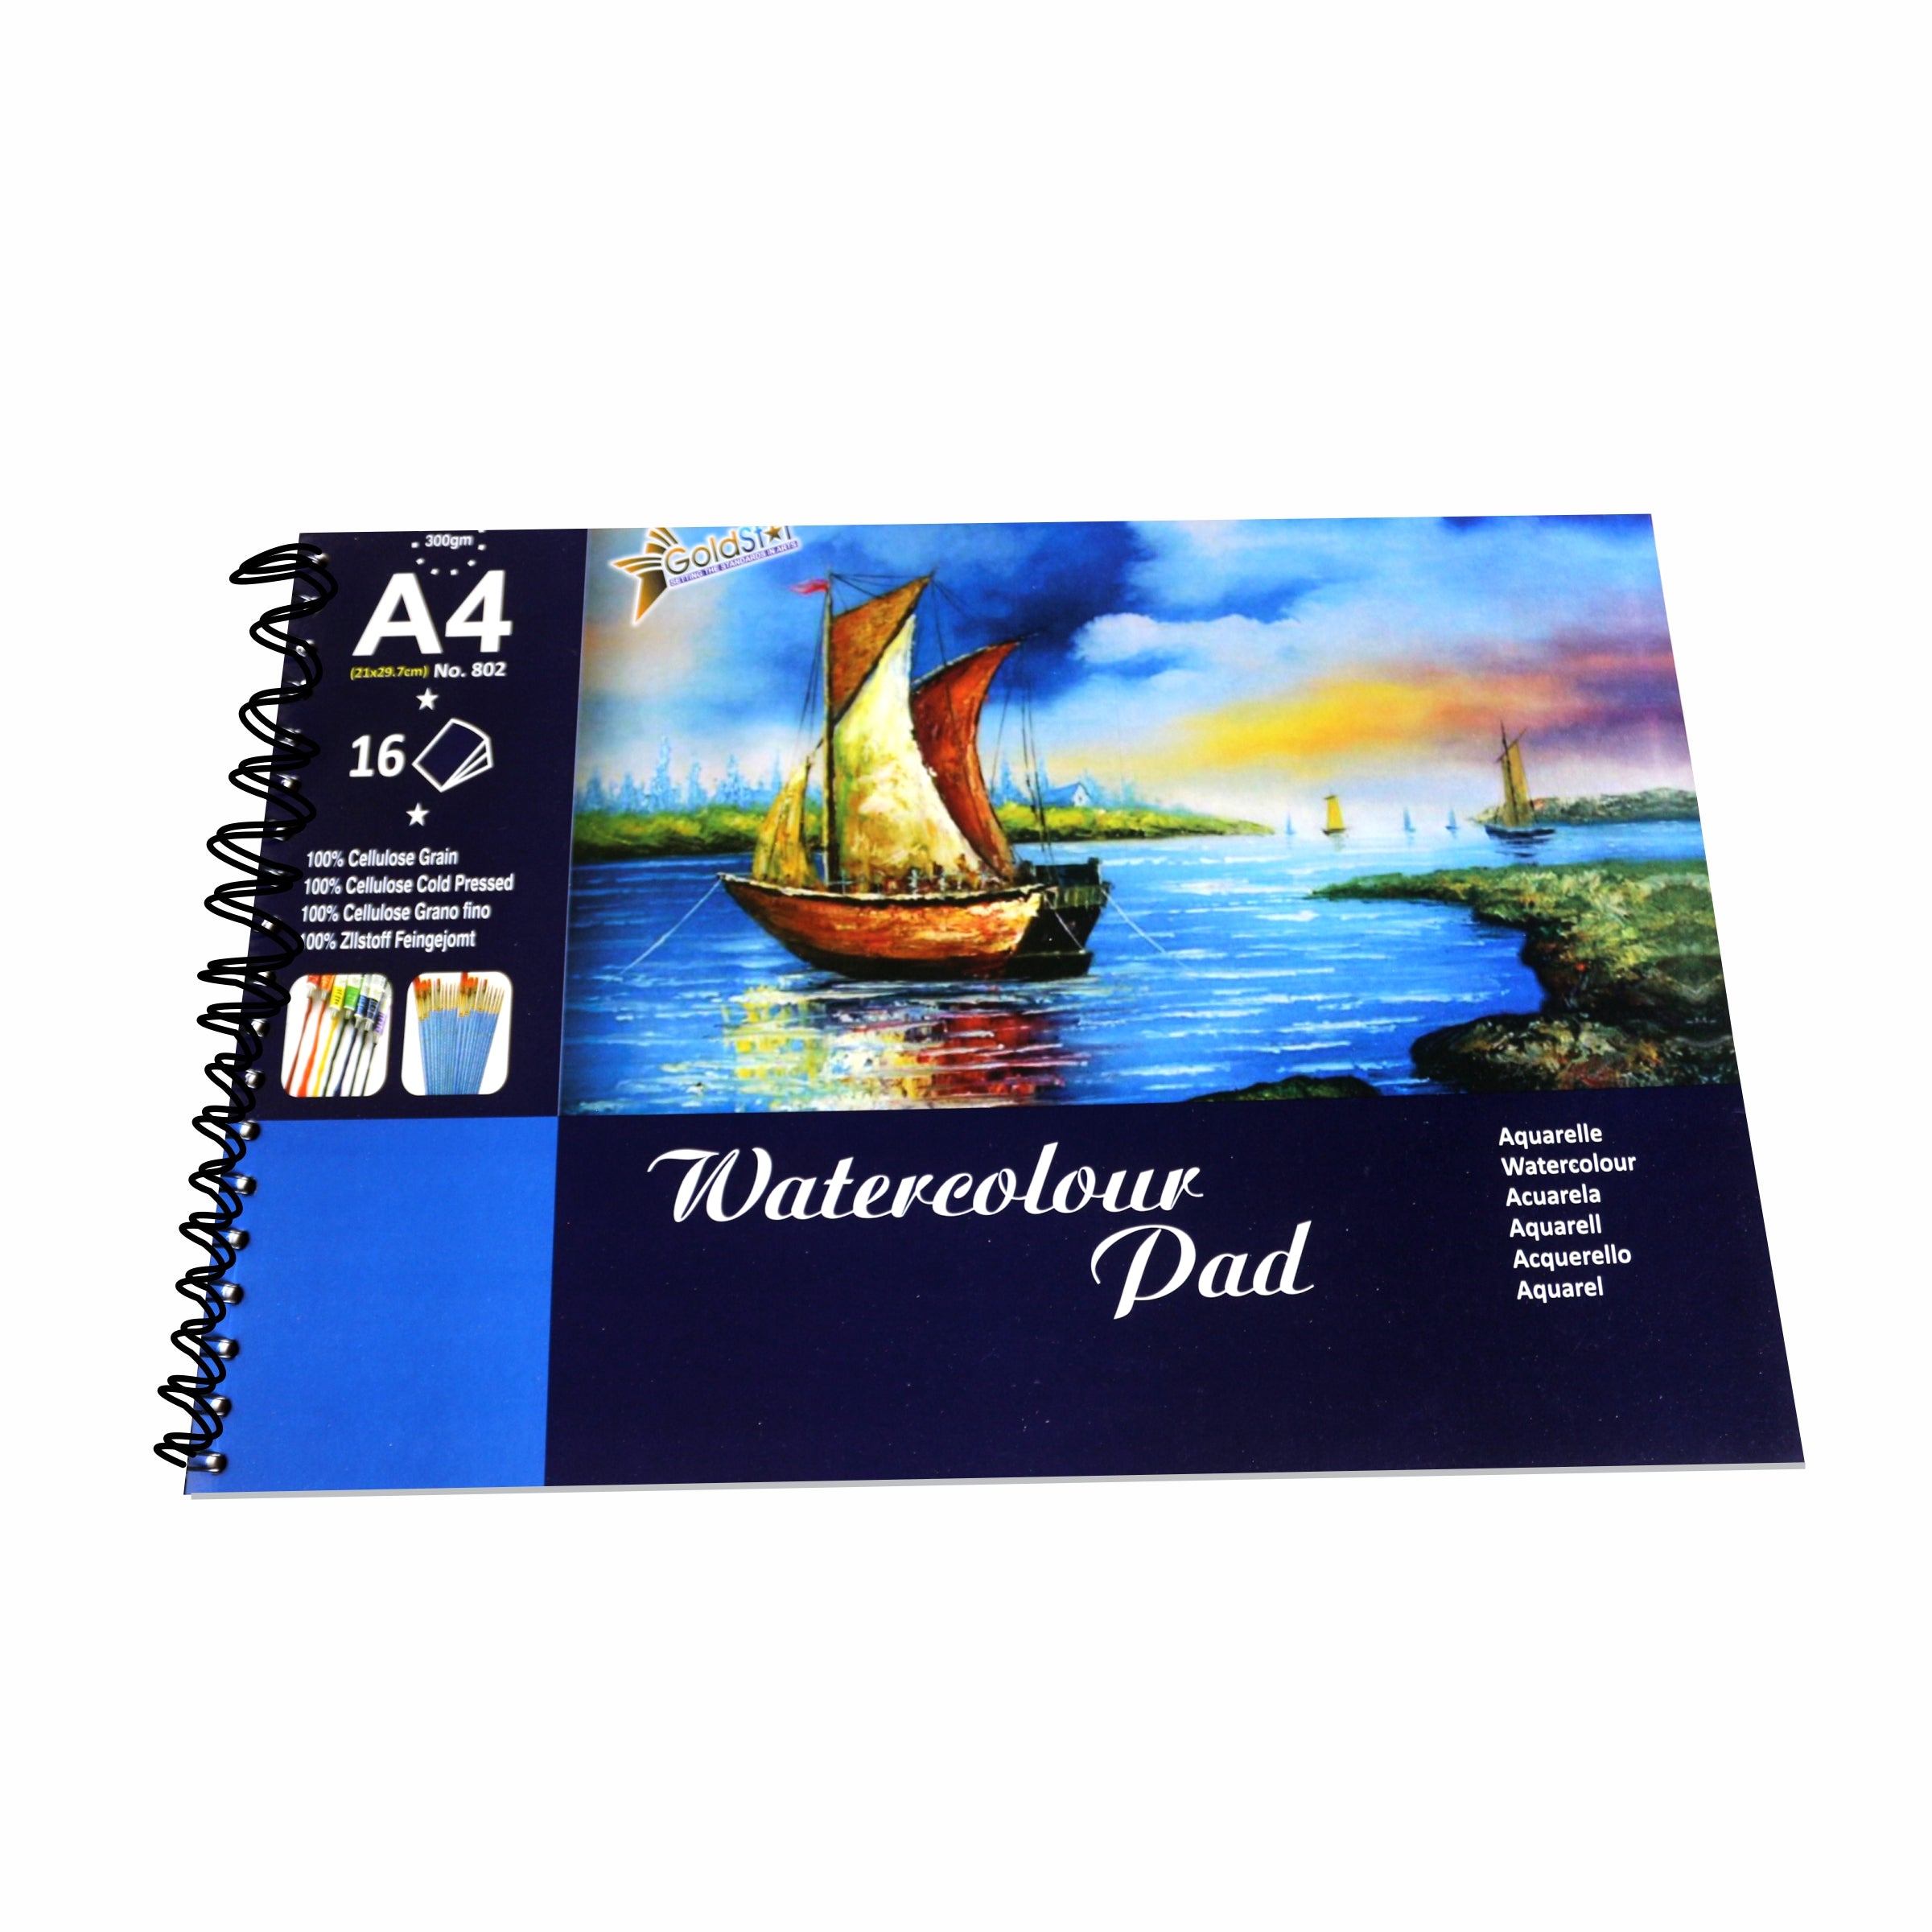 Watercolor Pad 300gm A4 SIze